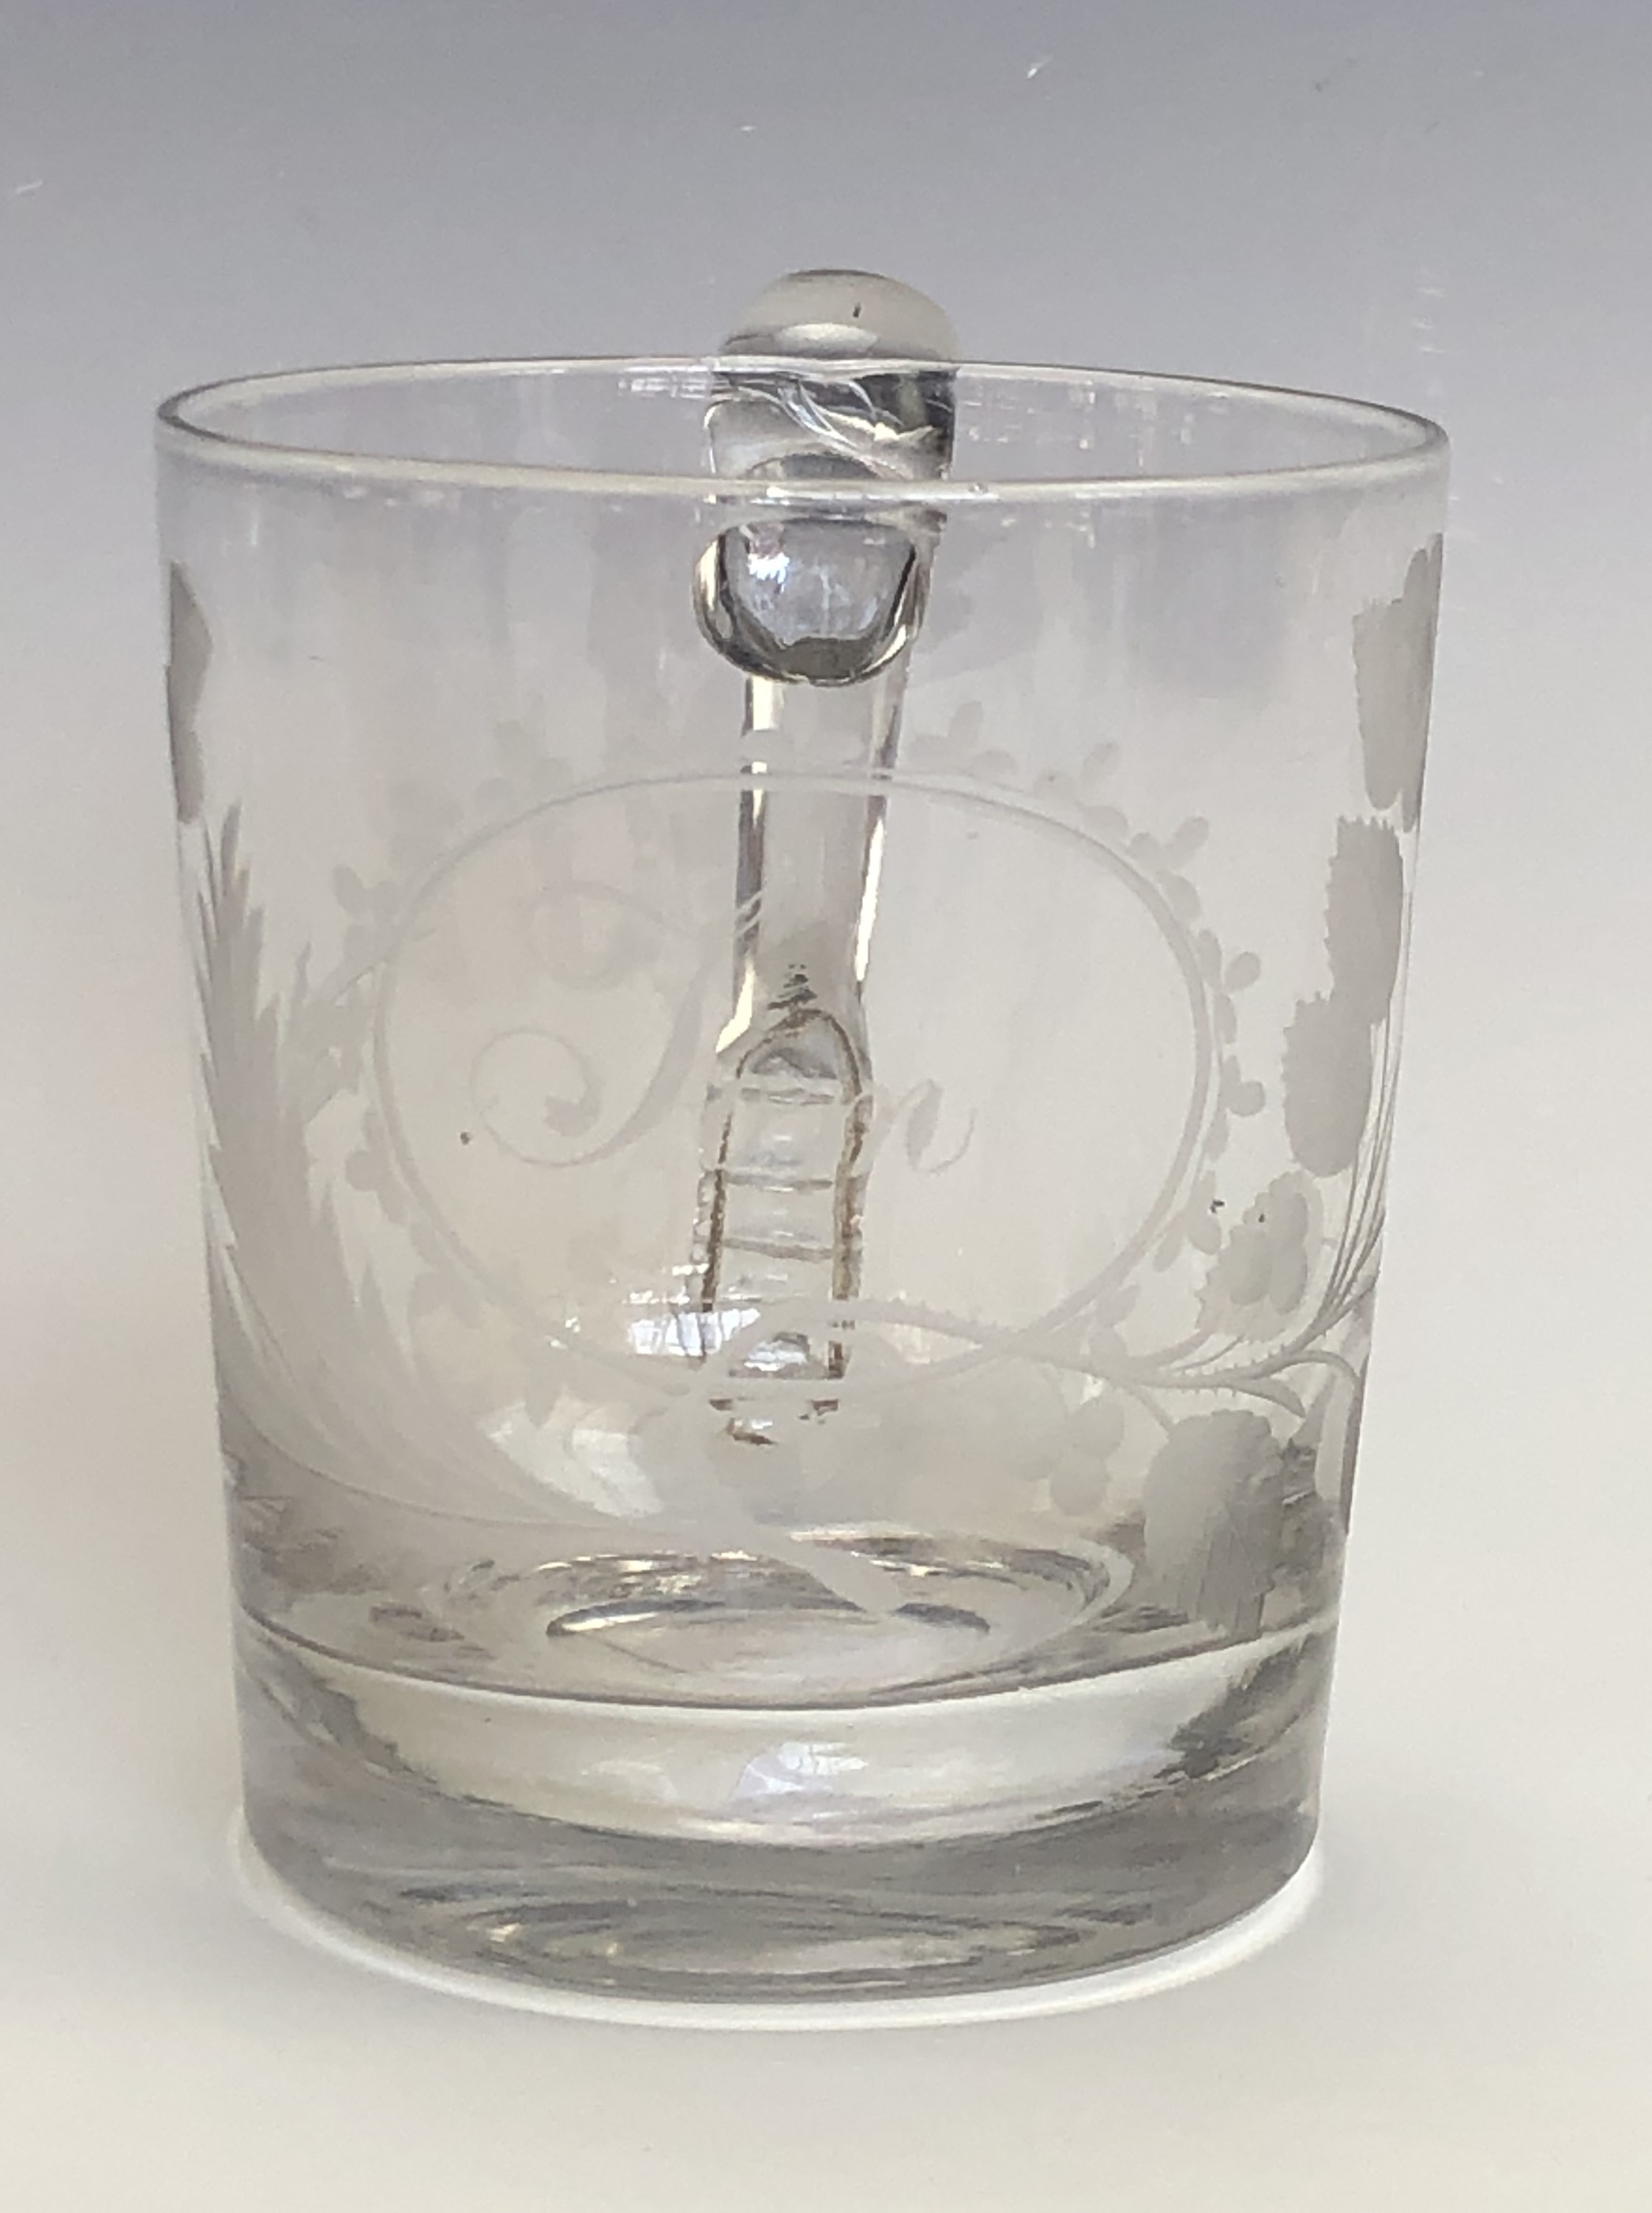 An early 19th Century glass Christening cup, wheel-cut with the name "Tom" within a floral - Image 6 of 6